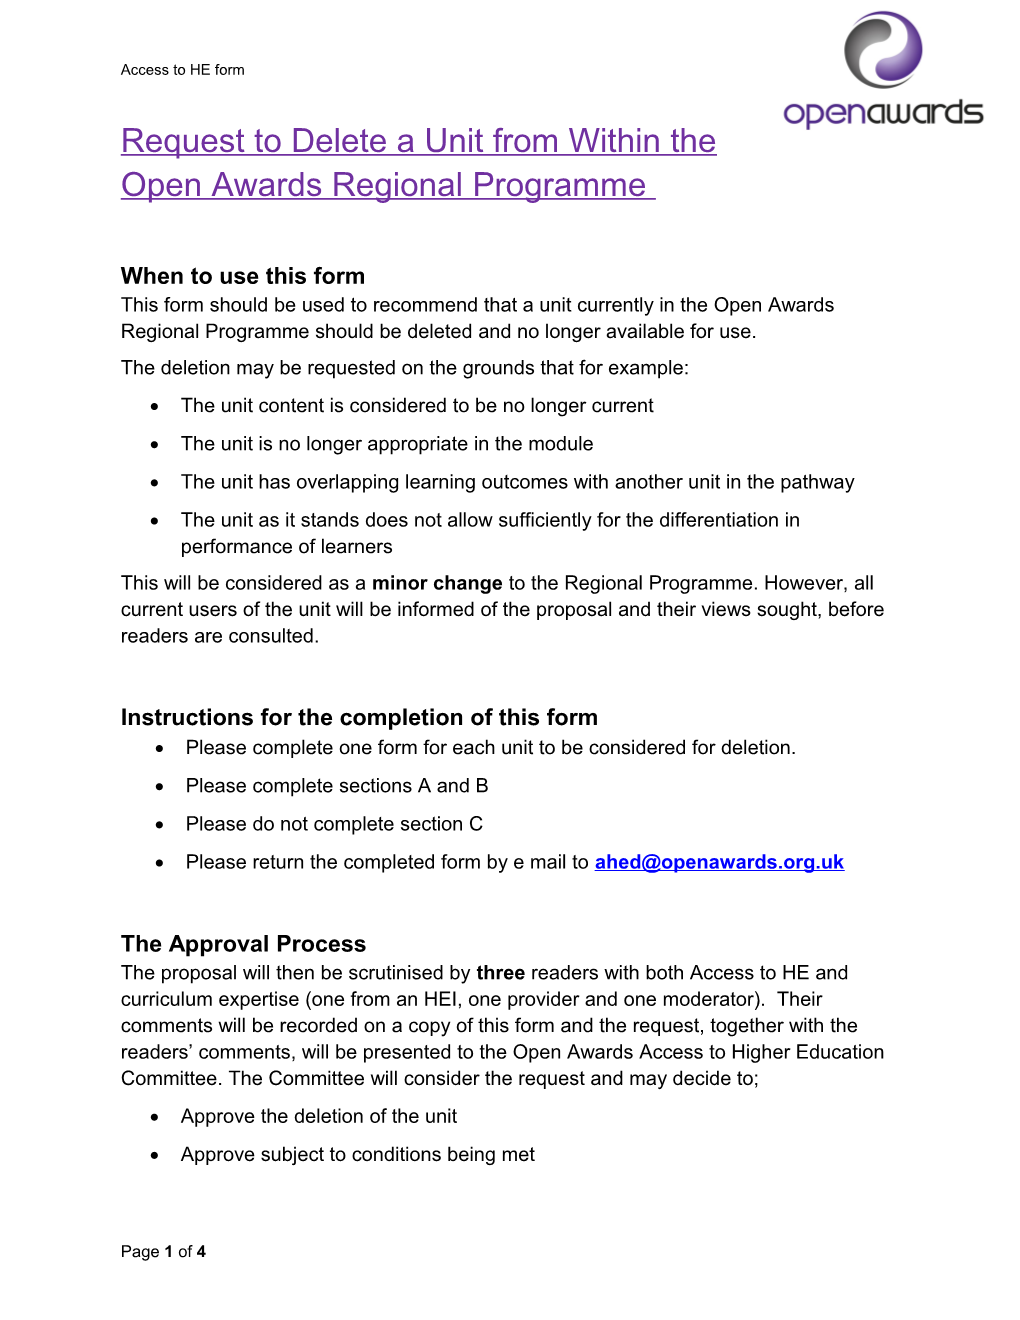 Request to Delete a Unit from Within the Open Awards Regional Programme